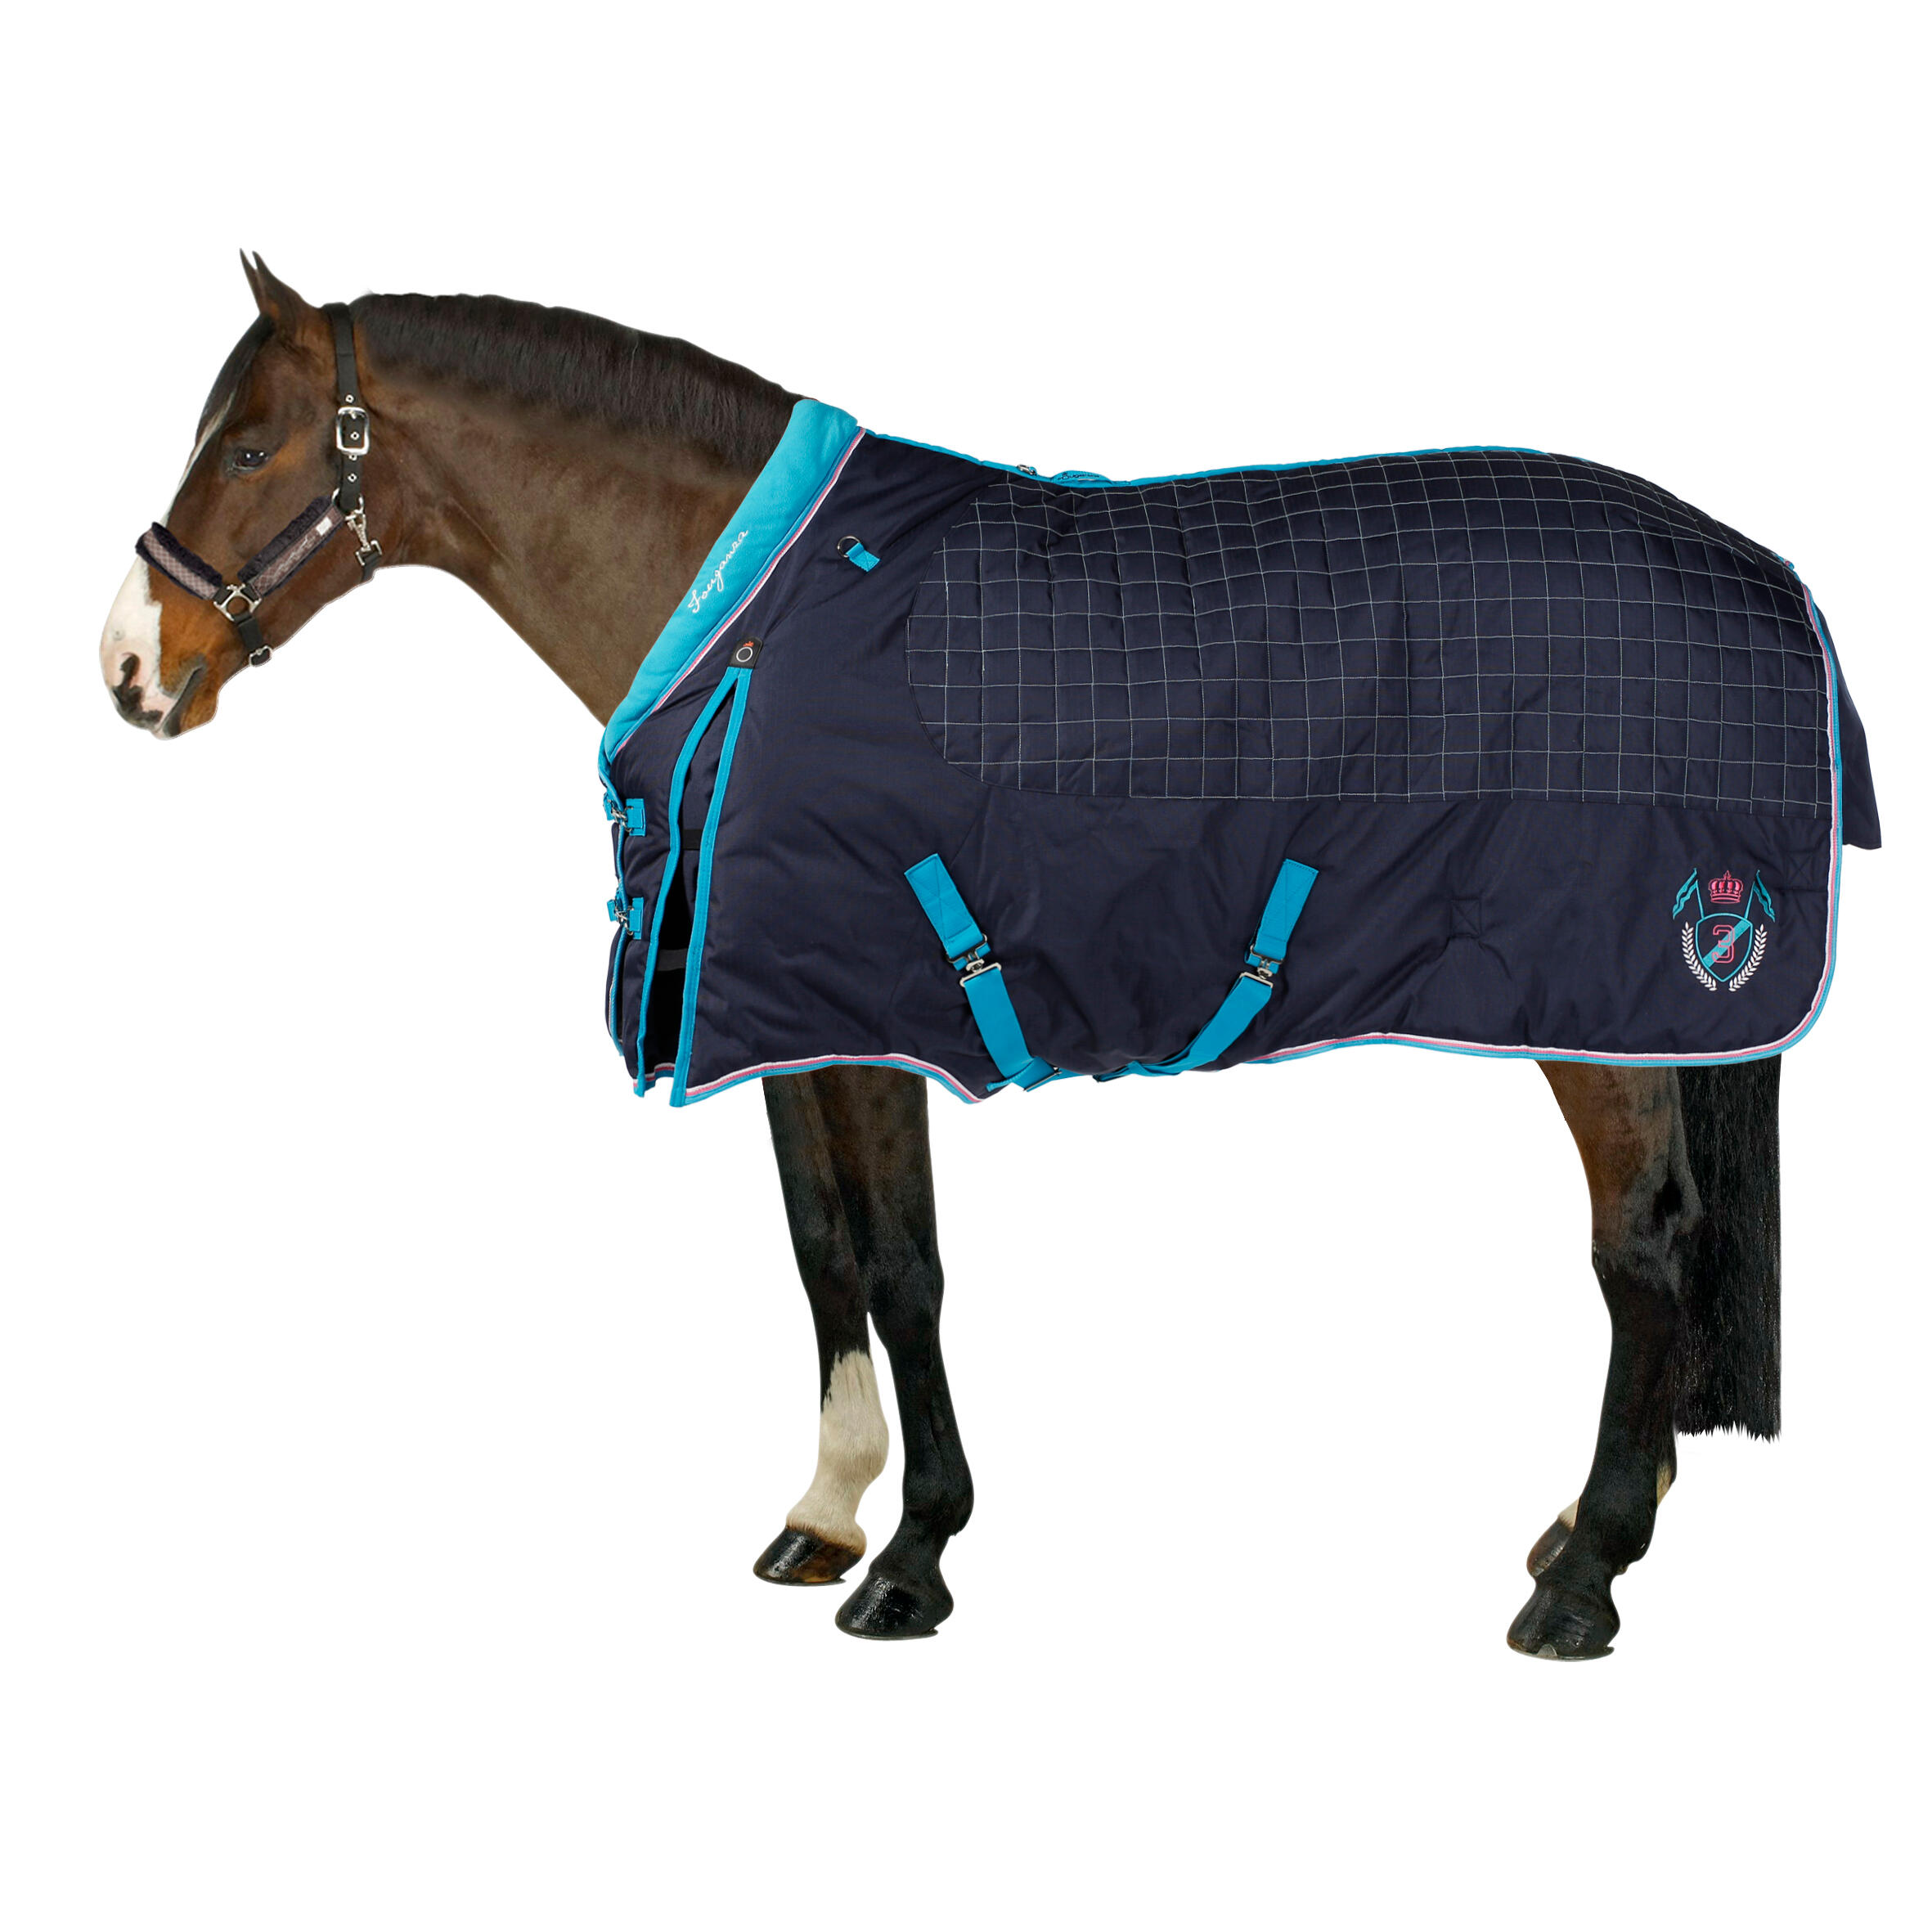 FOUGANZA Stable 400 "3" Horse Riding Stable Rug for Horse or Pony - Blue/Turquoise